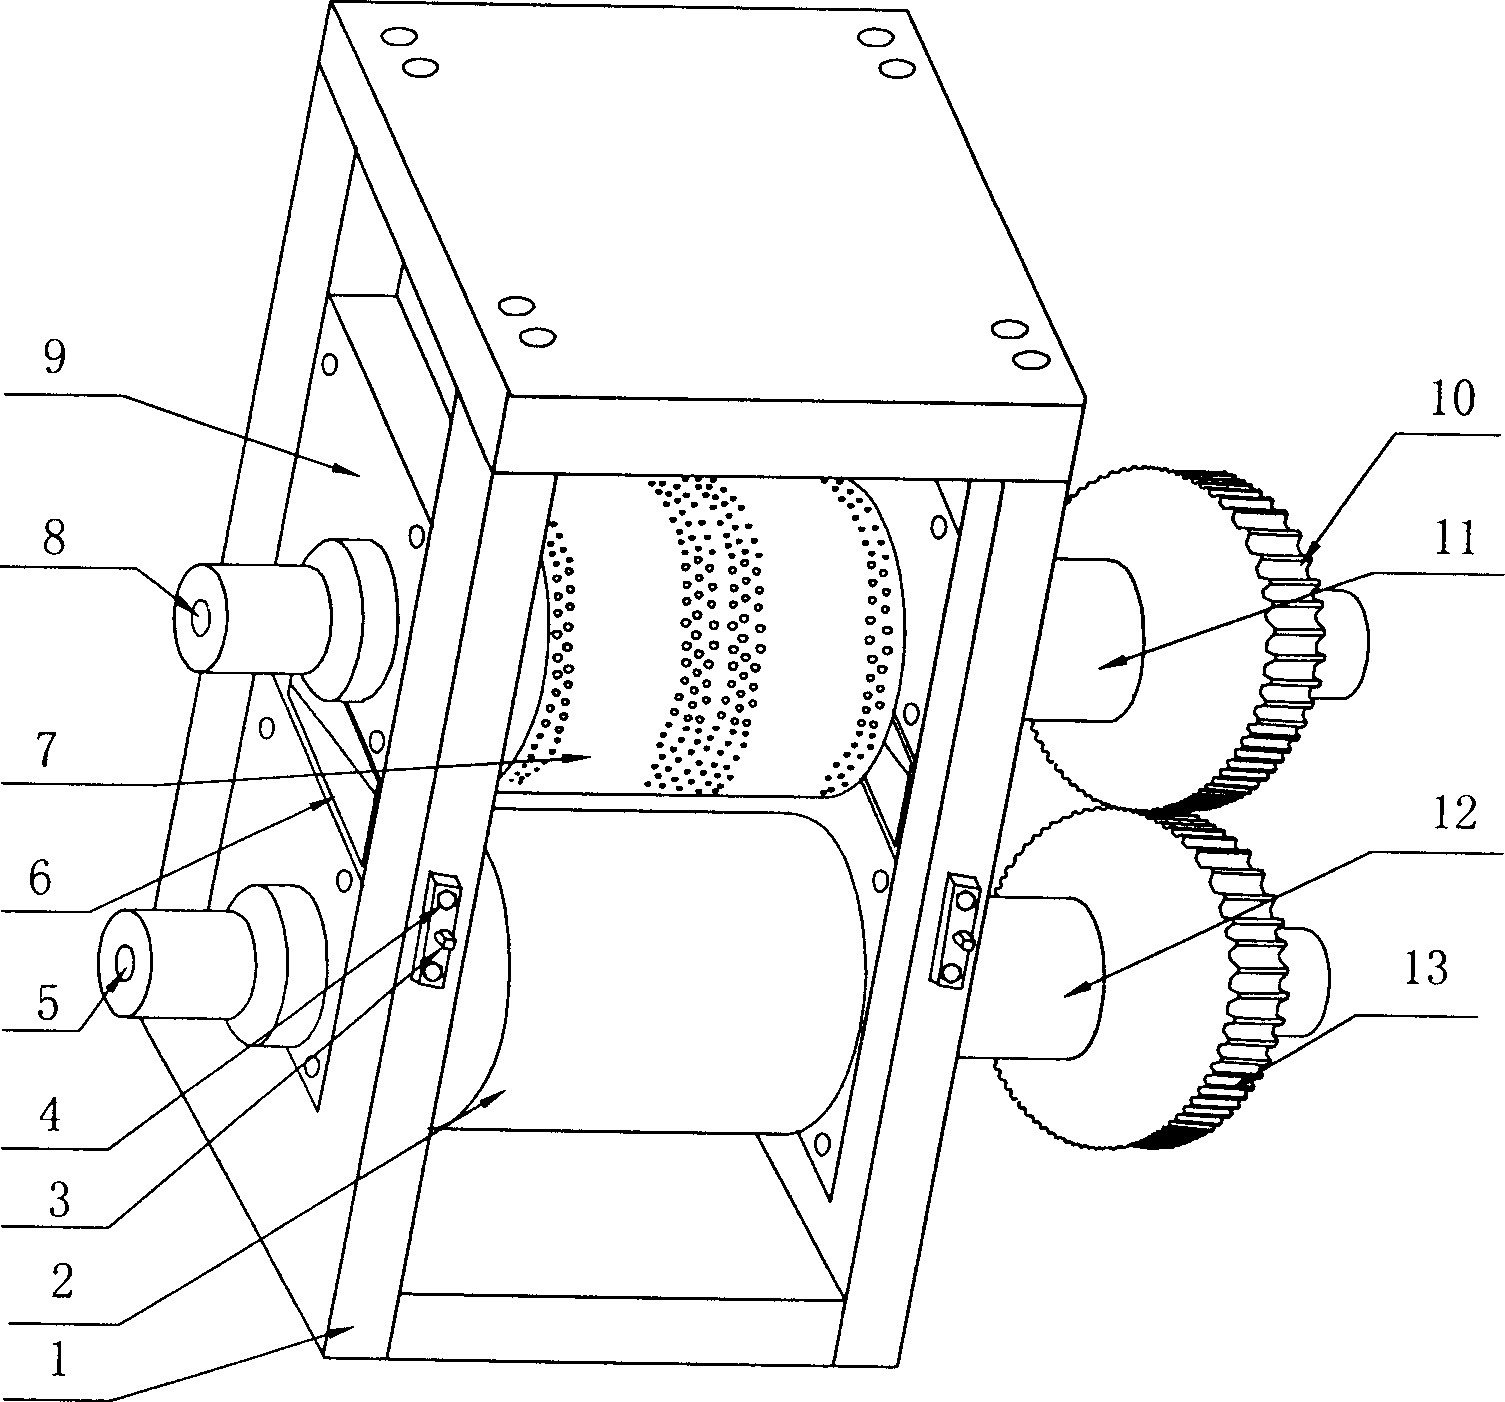 Apparatus for perforating surface of sanitary articals